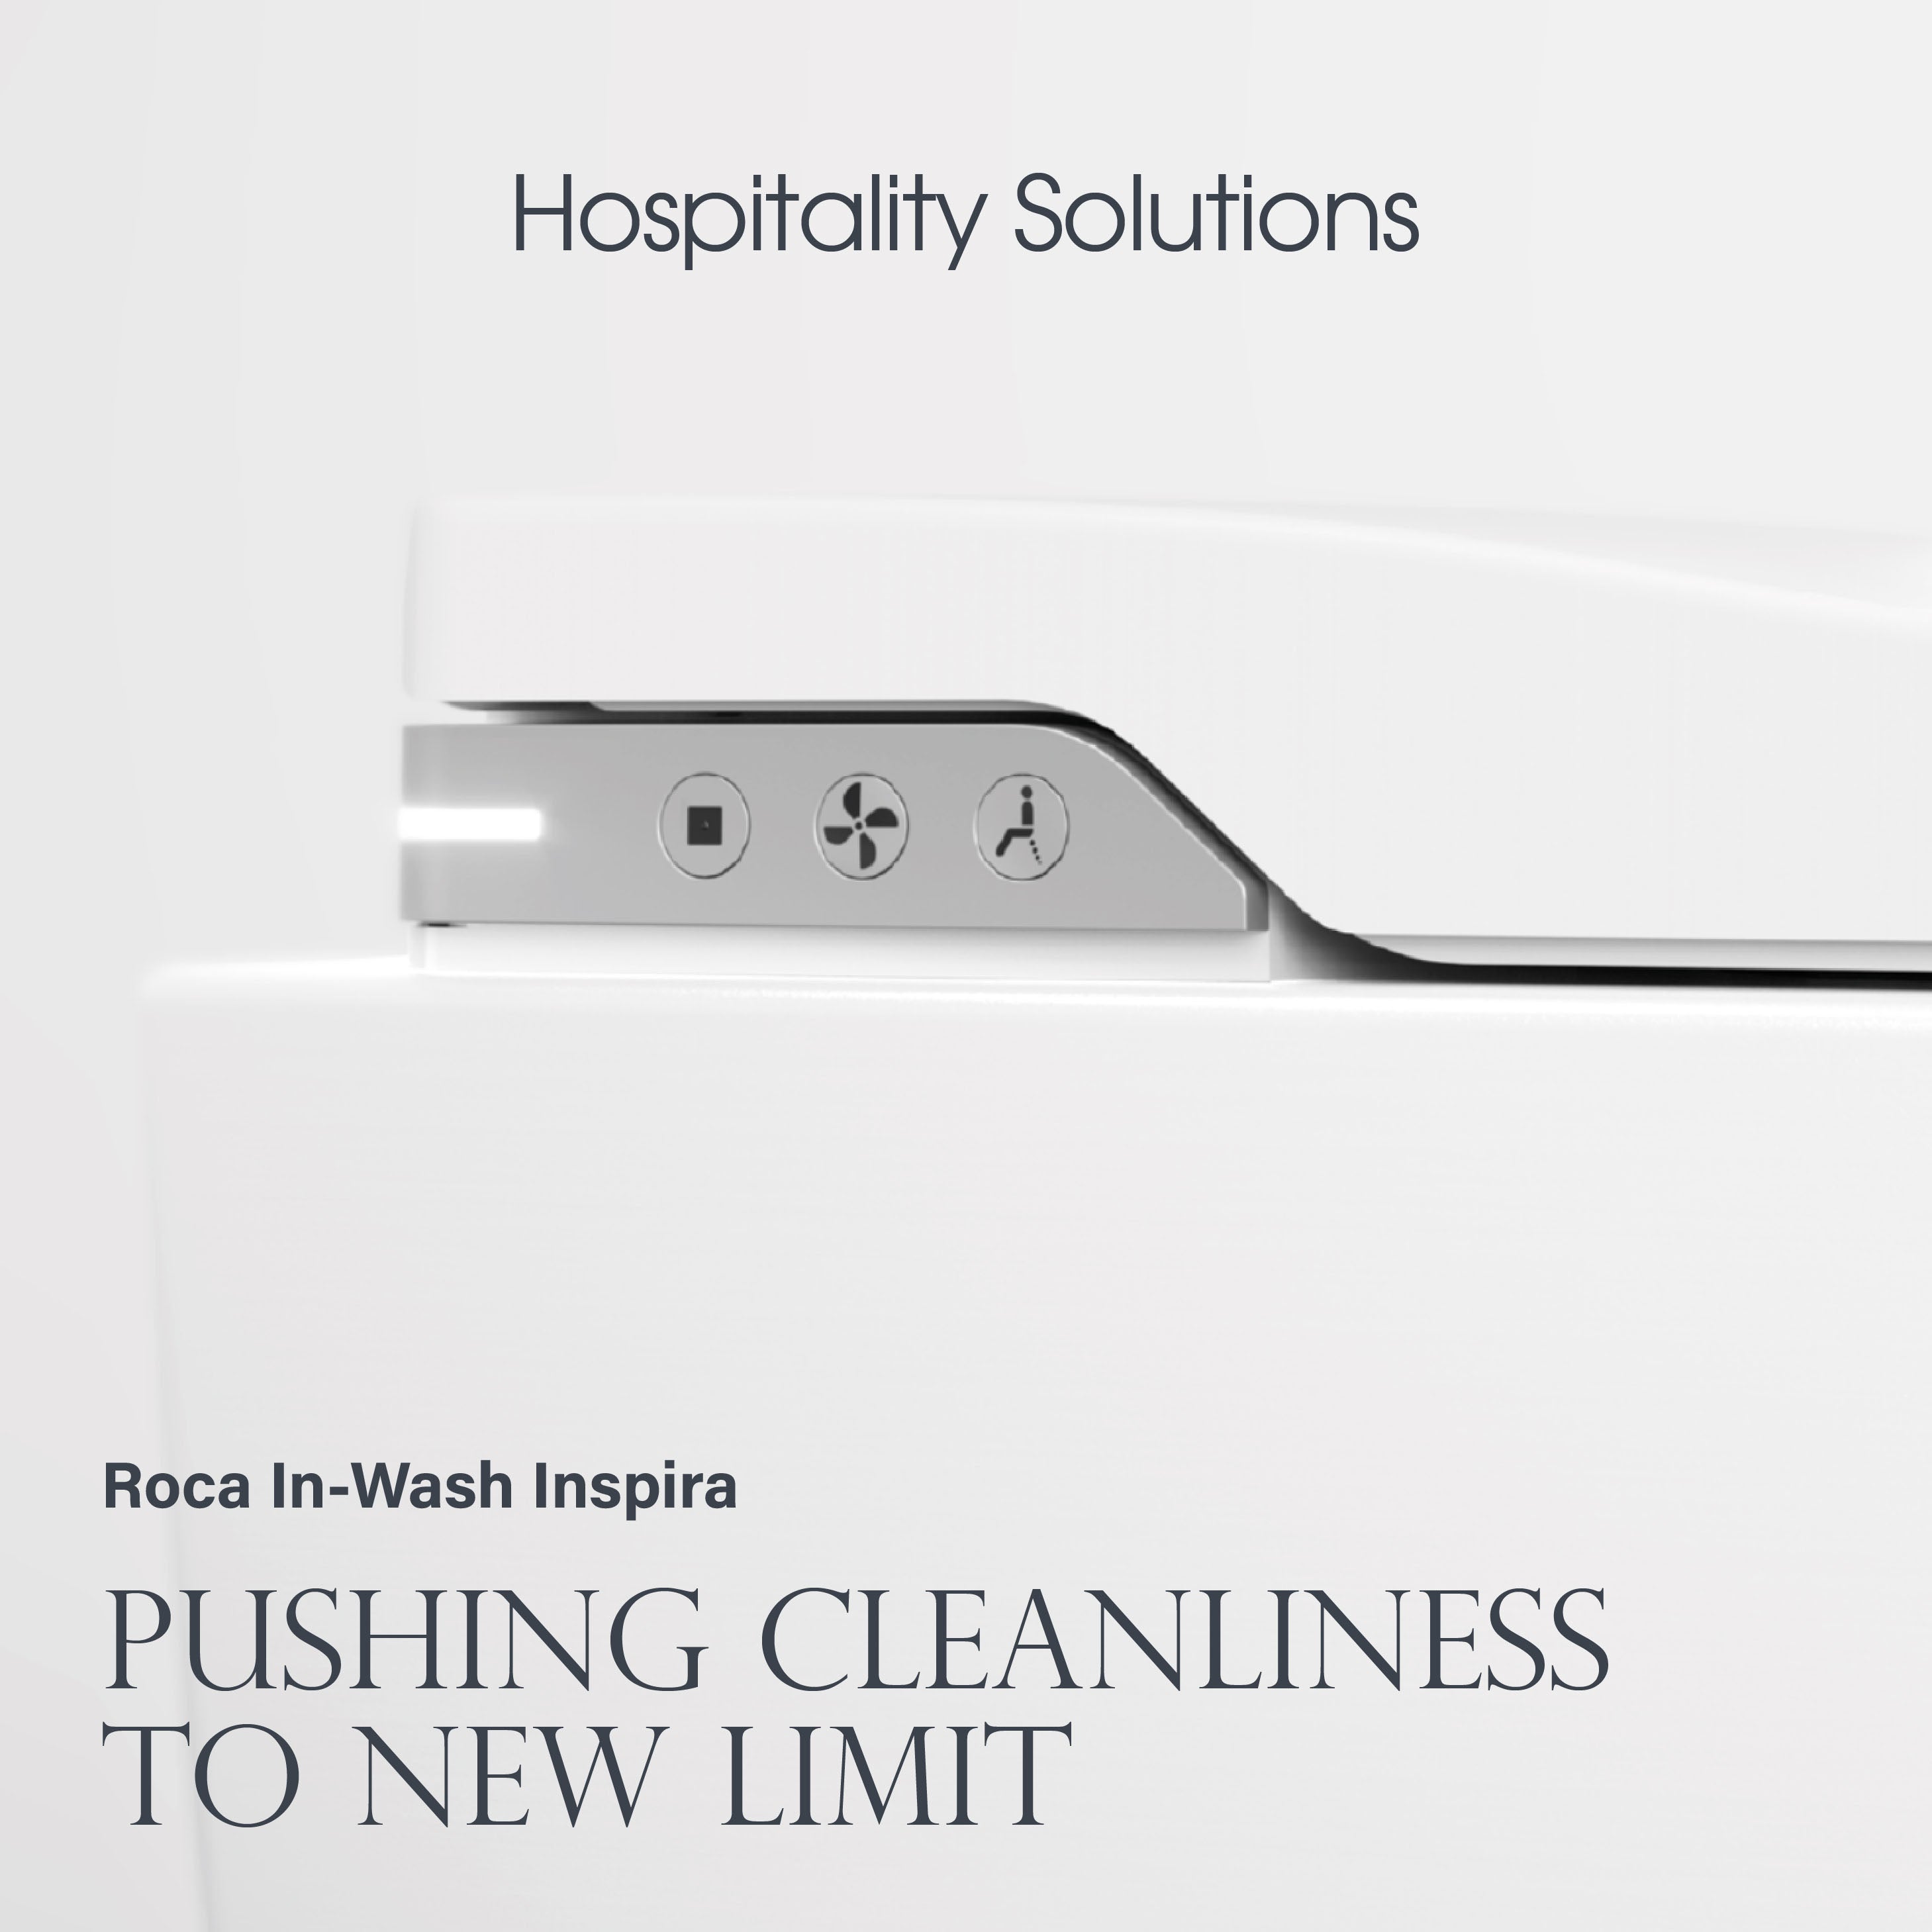 COLOURLIVING | HOSPITALITY SOLUTIONS | PUSHING CLEANLINESS TO NEW LIMIT